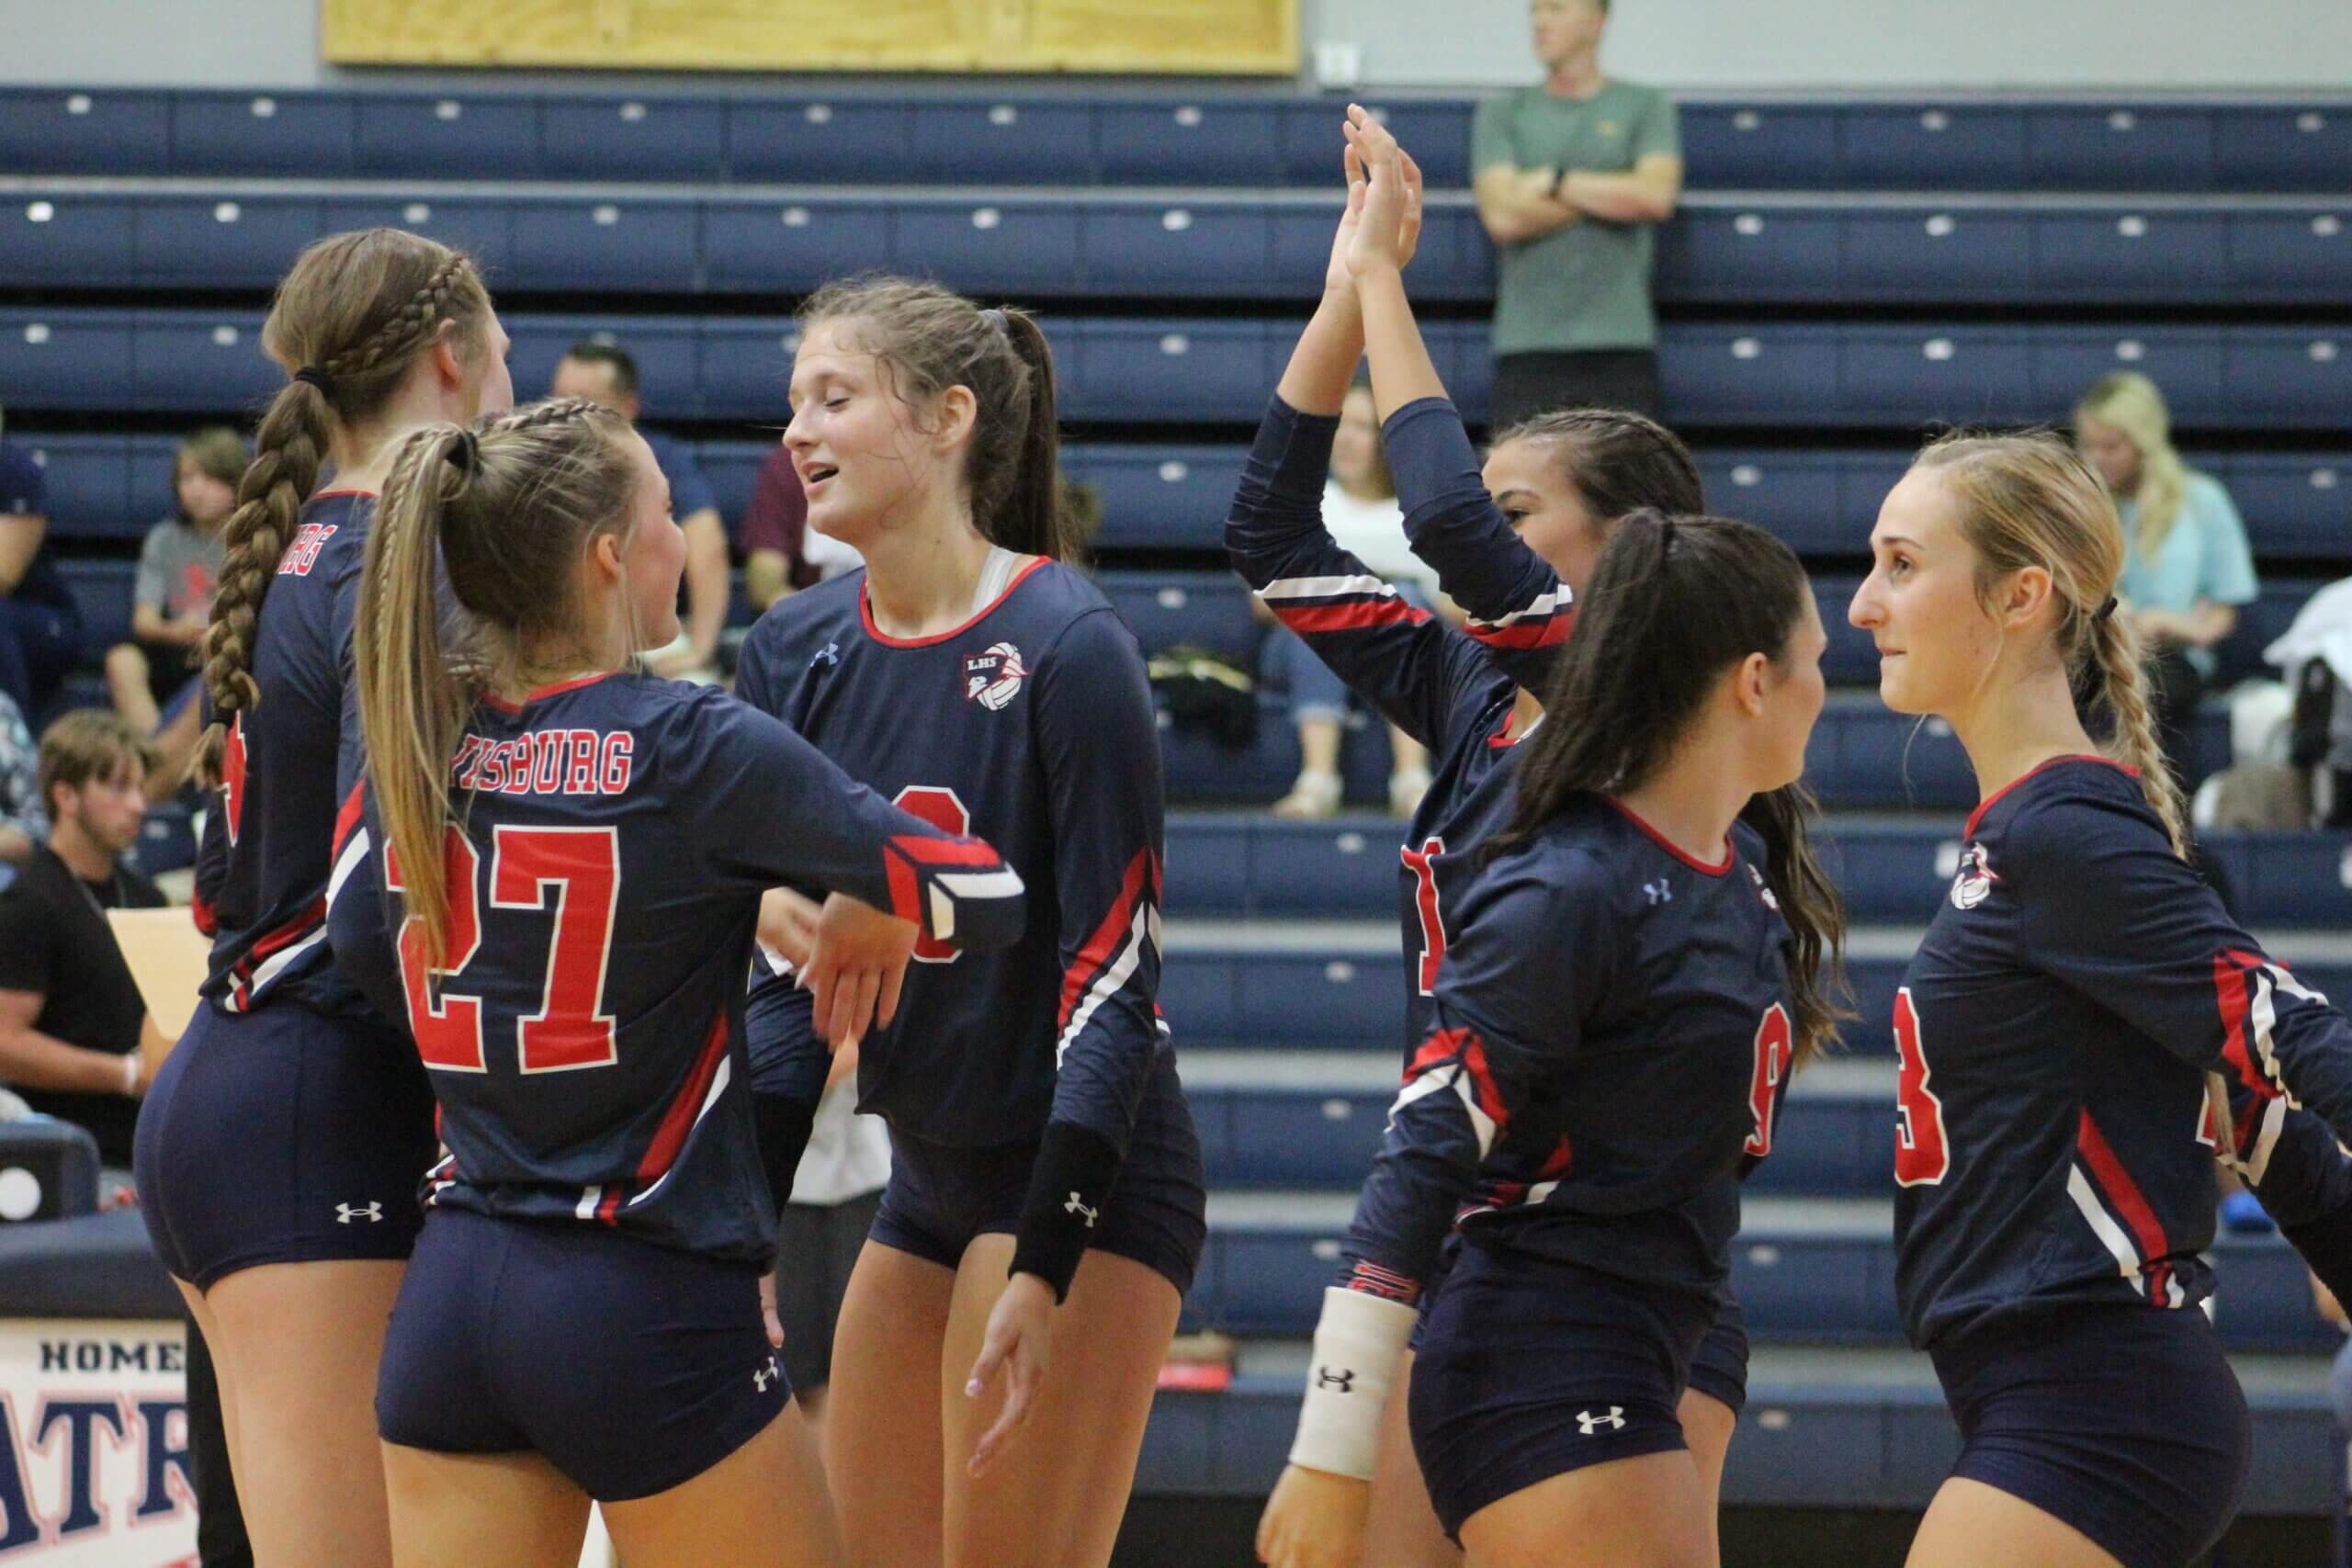 Volleyball teams hold court in Tuesday action